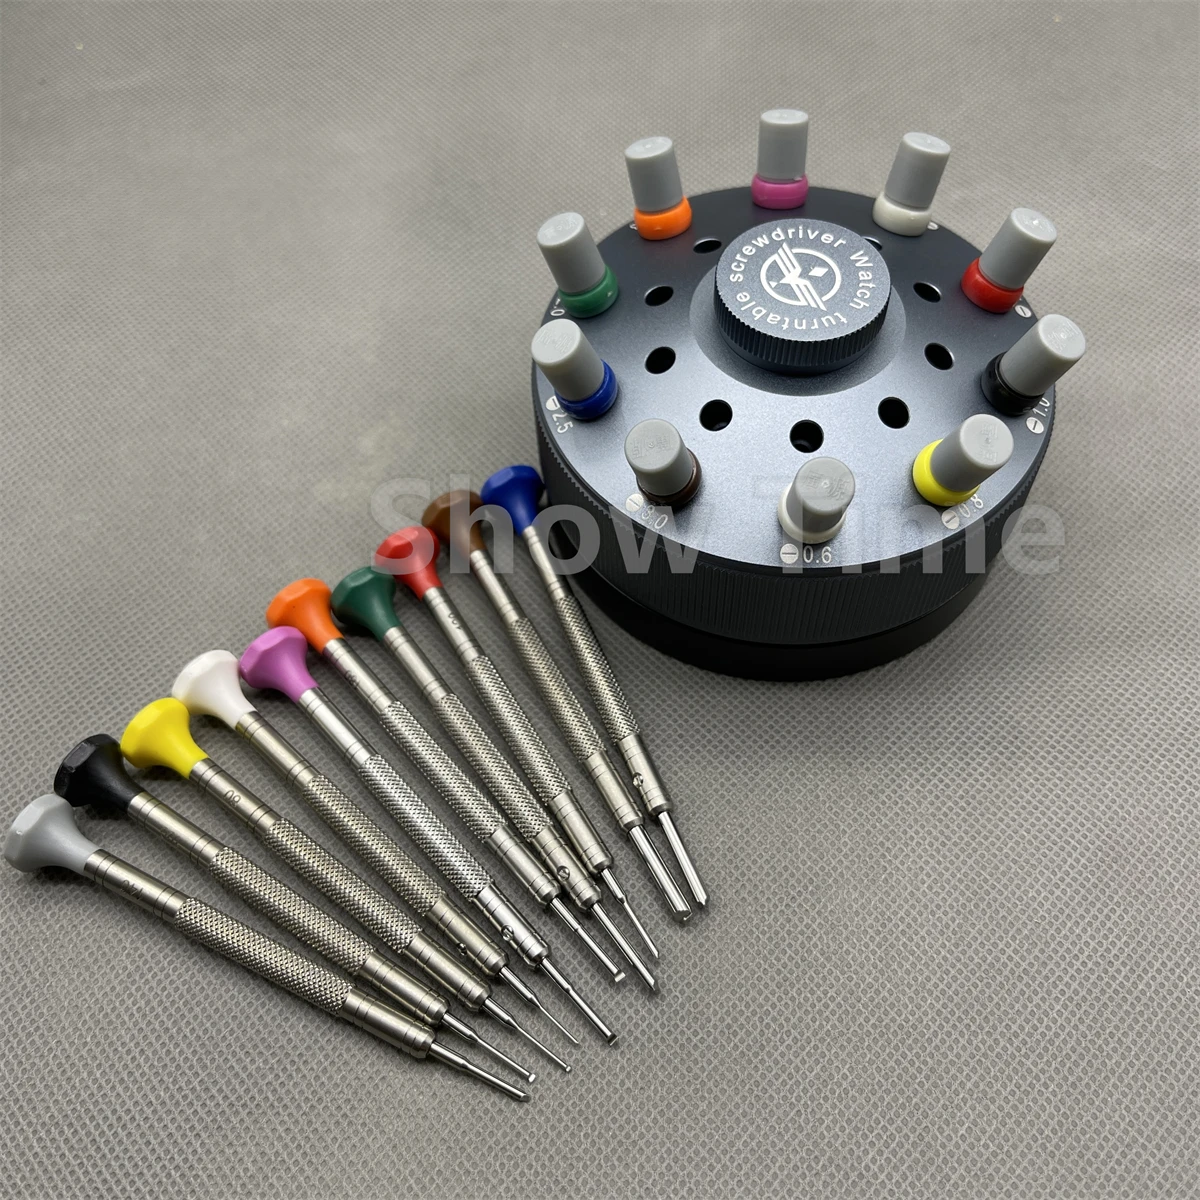 

best quality 316L stainless steel non-slip watchmakers ergonomic 10 piece screwdriver set